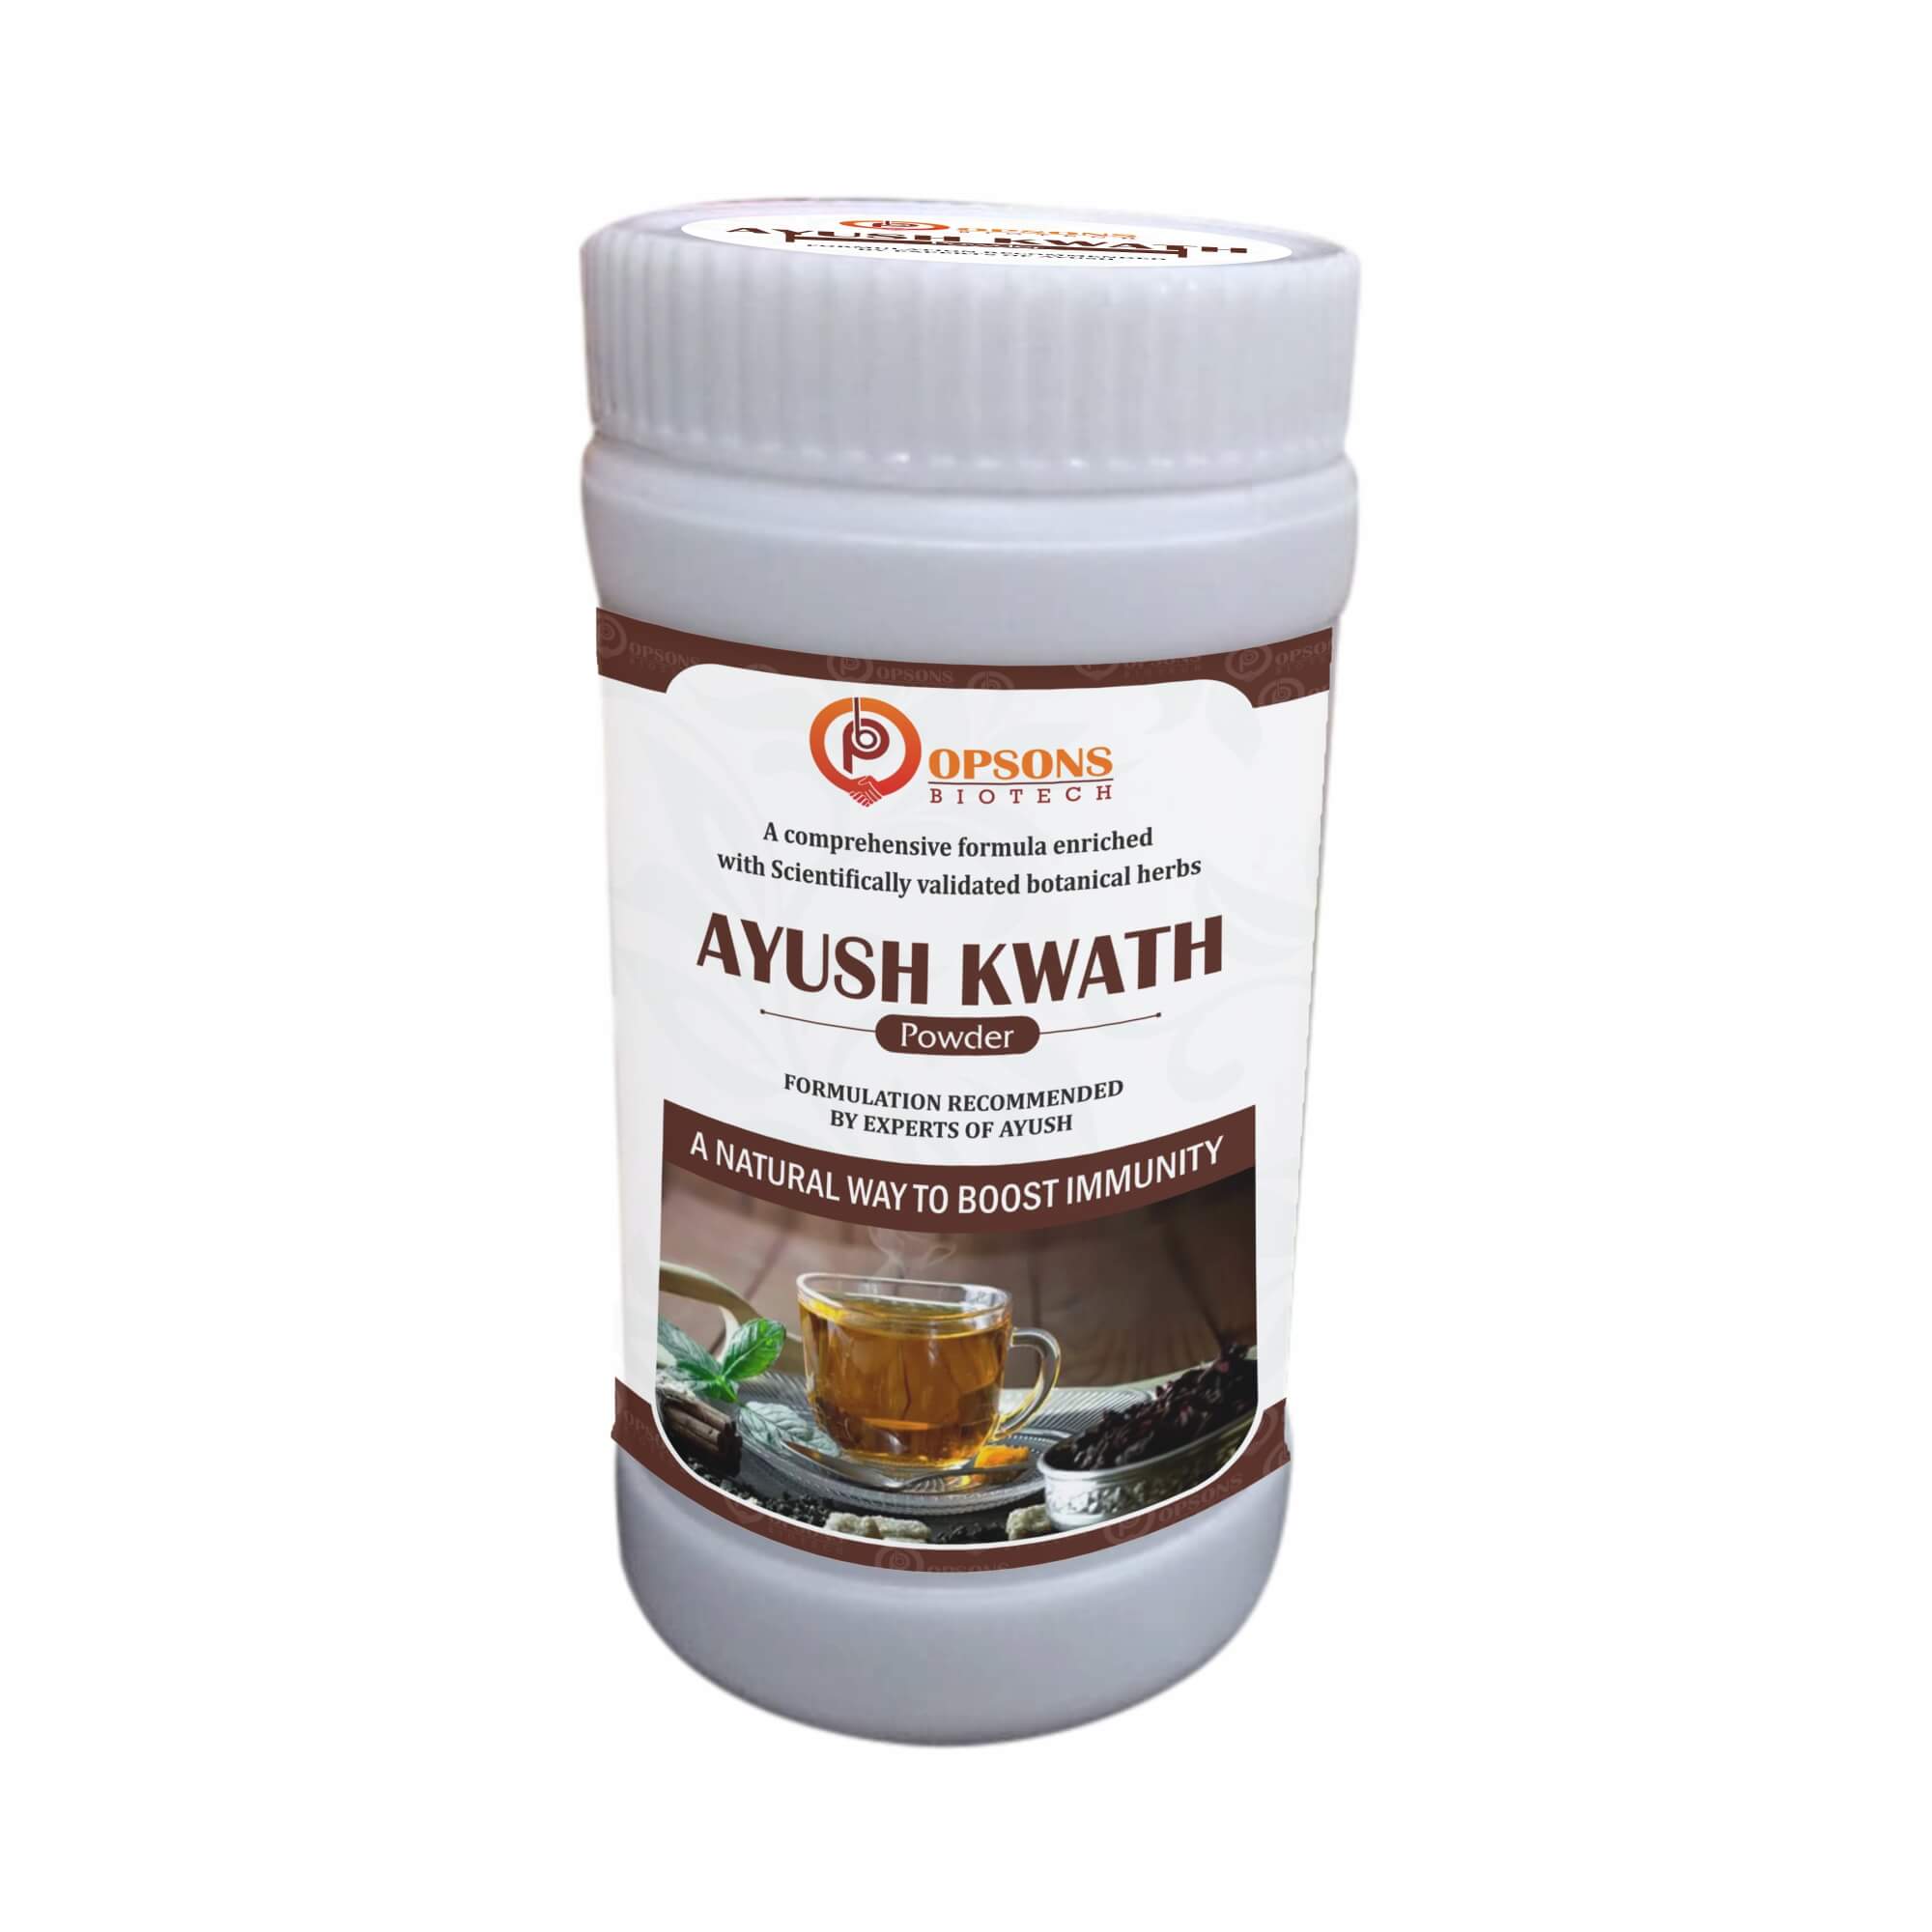 Product Name: Ayush Kwath, Compositions of Ayush Kwath are Comprehensive Formula enriched with Scientifically validated betanical herbs - Opsons Biotech